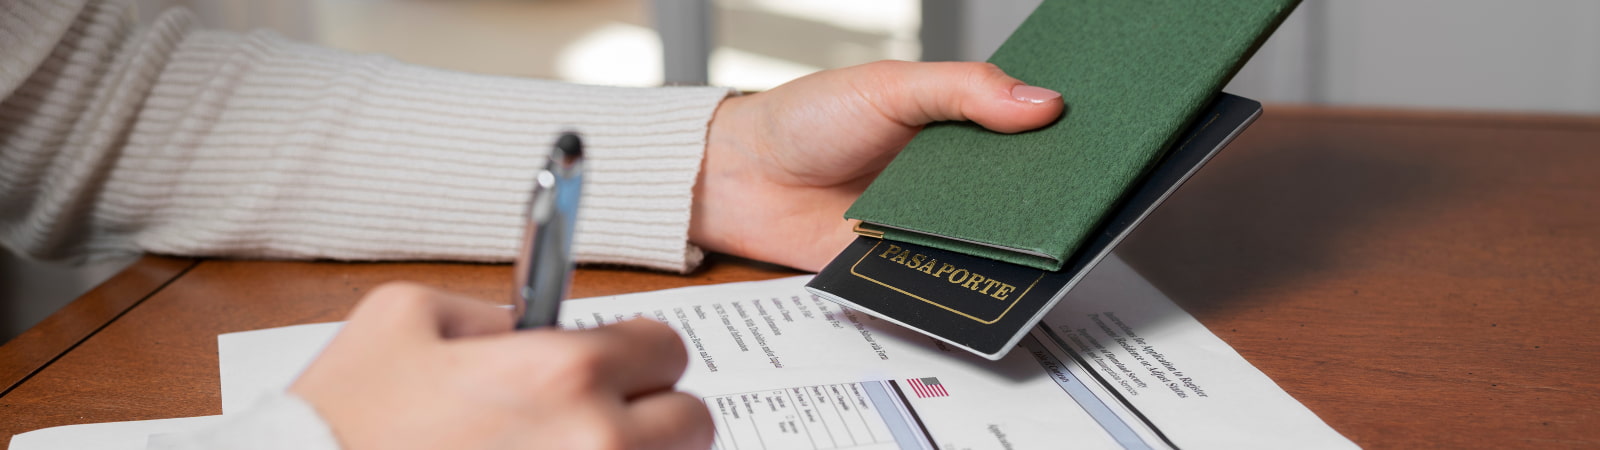 What Are The Short & Long-Term Visa Options Available In The Uae, Saudi Arabia & Qatar?